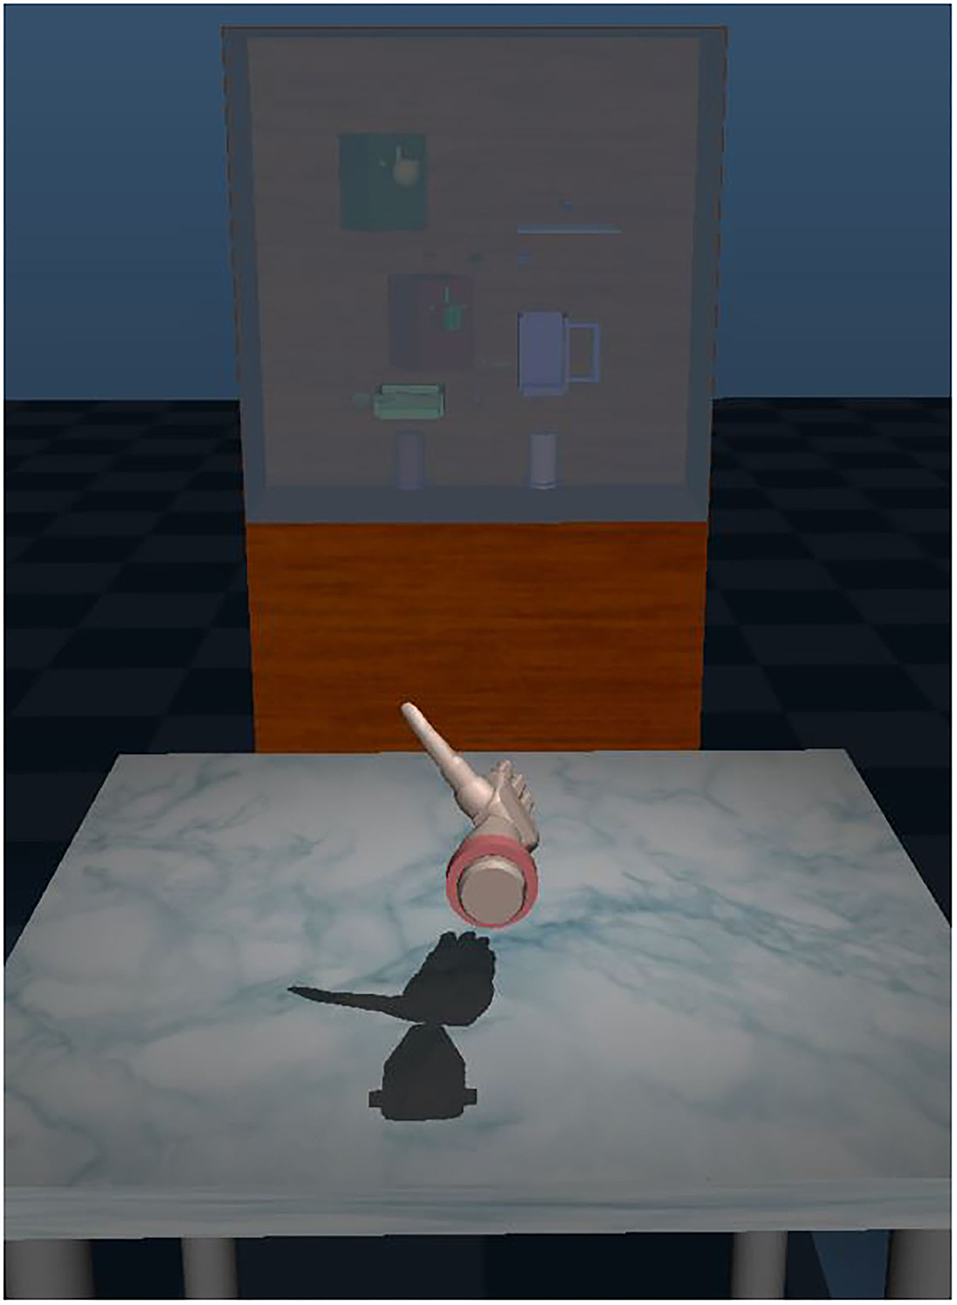 Almost Accurate DOORS RP 👁️ - Roblox